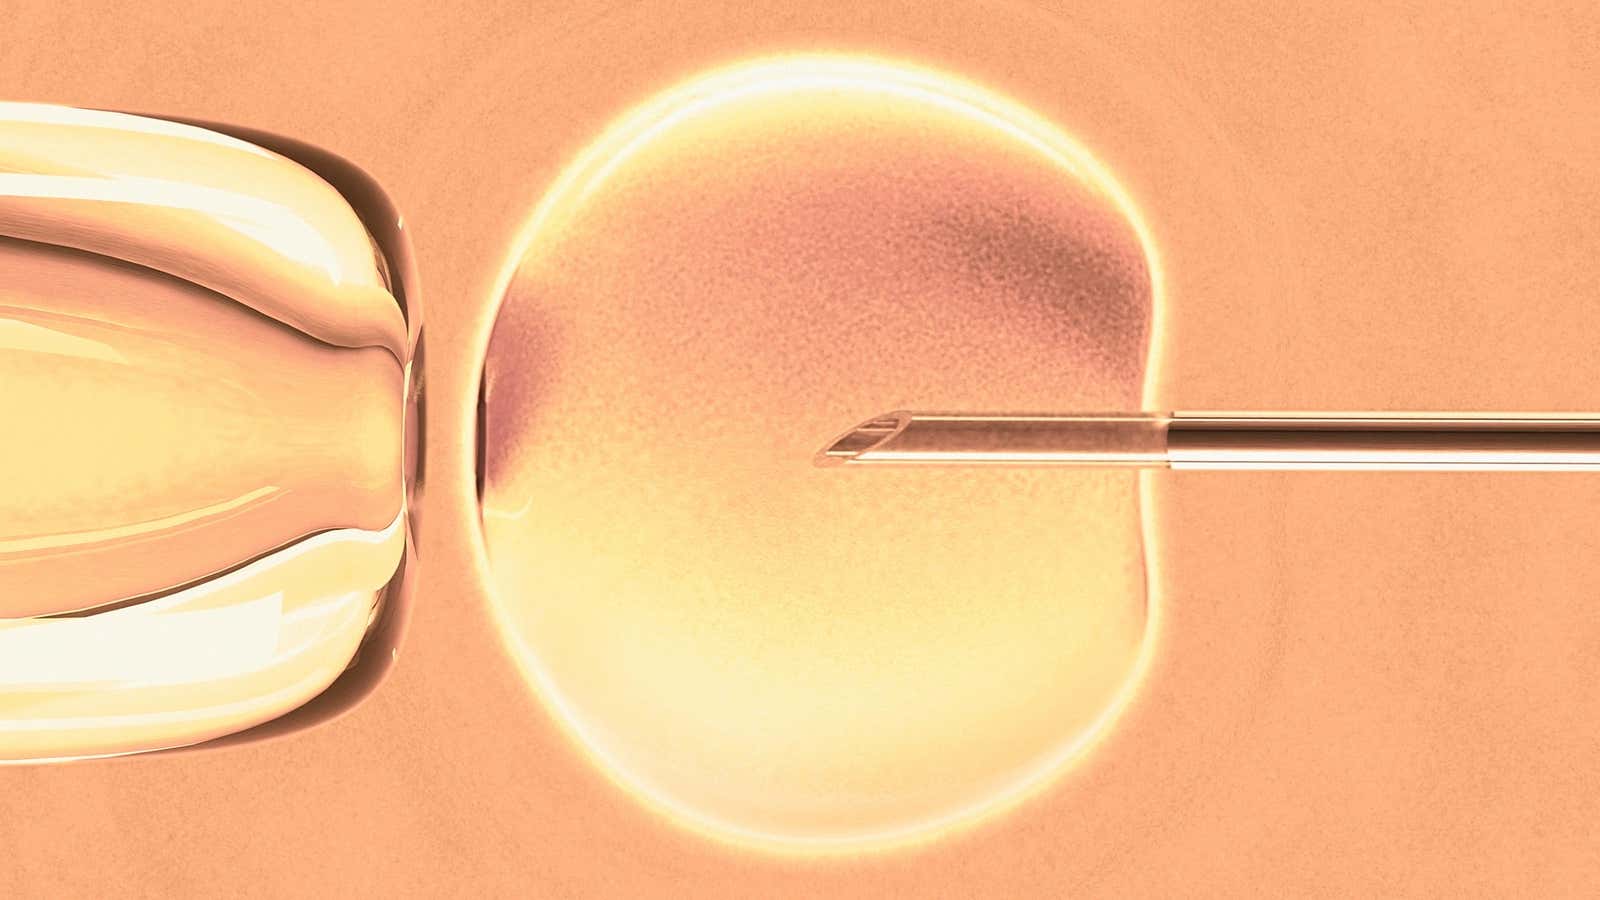 The Ostensibly Pro-Life Act of IVF Is Now Endangered